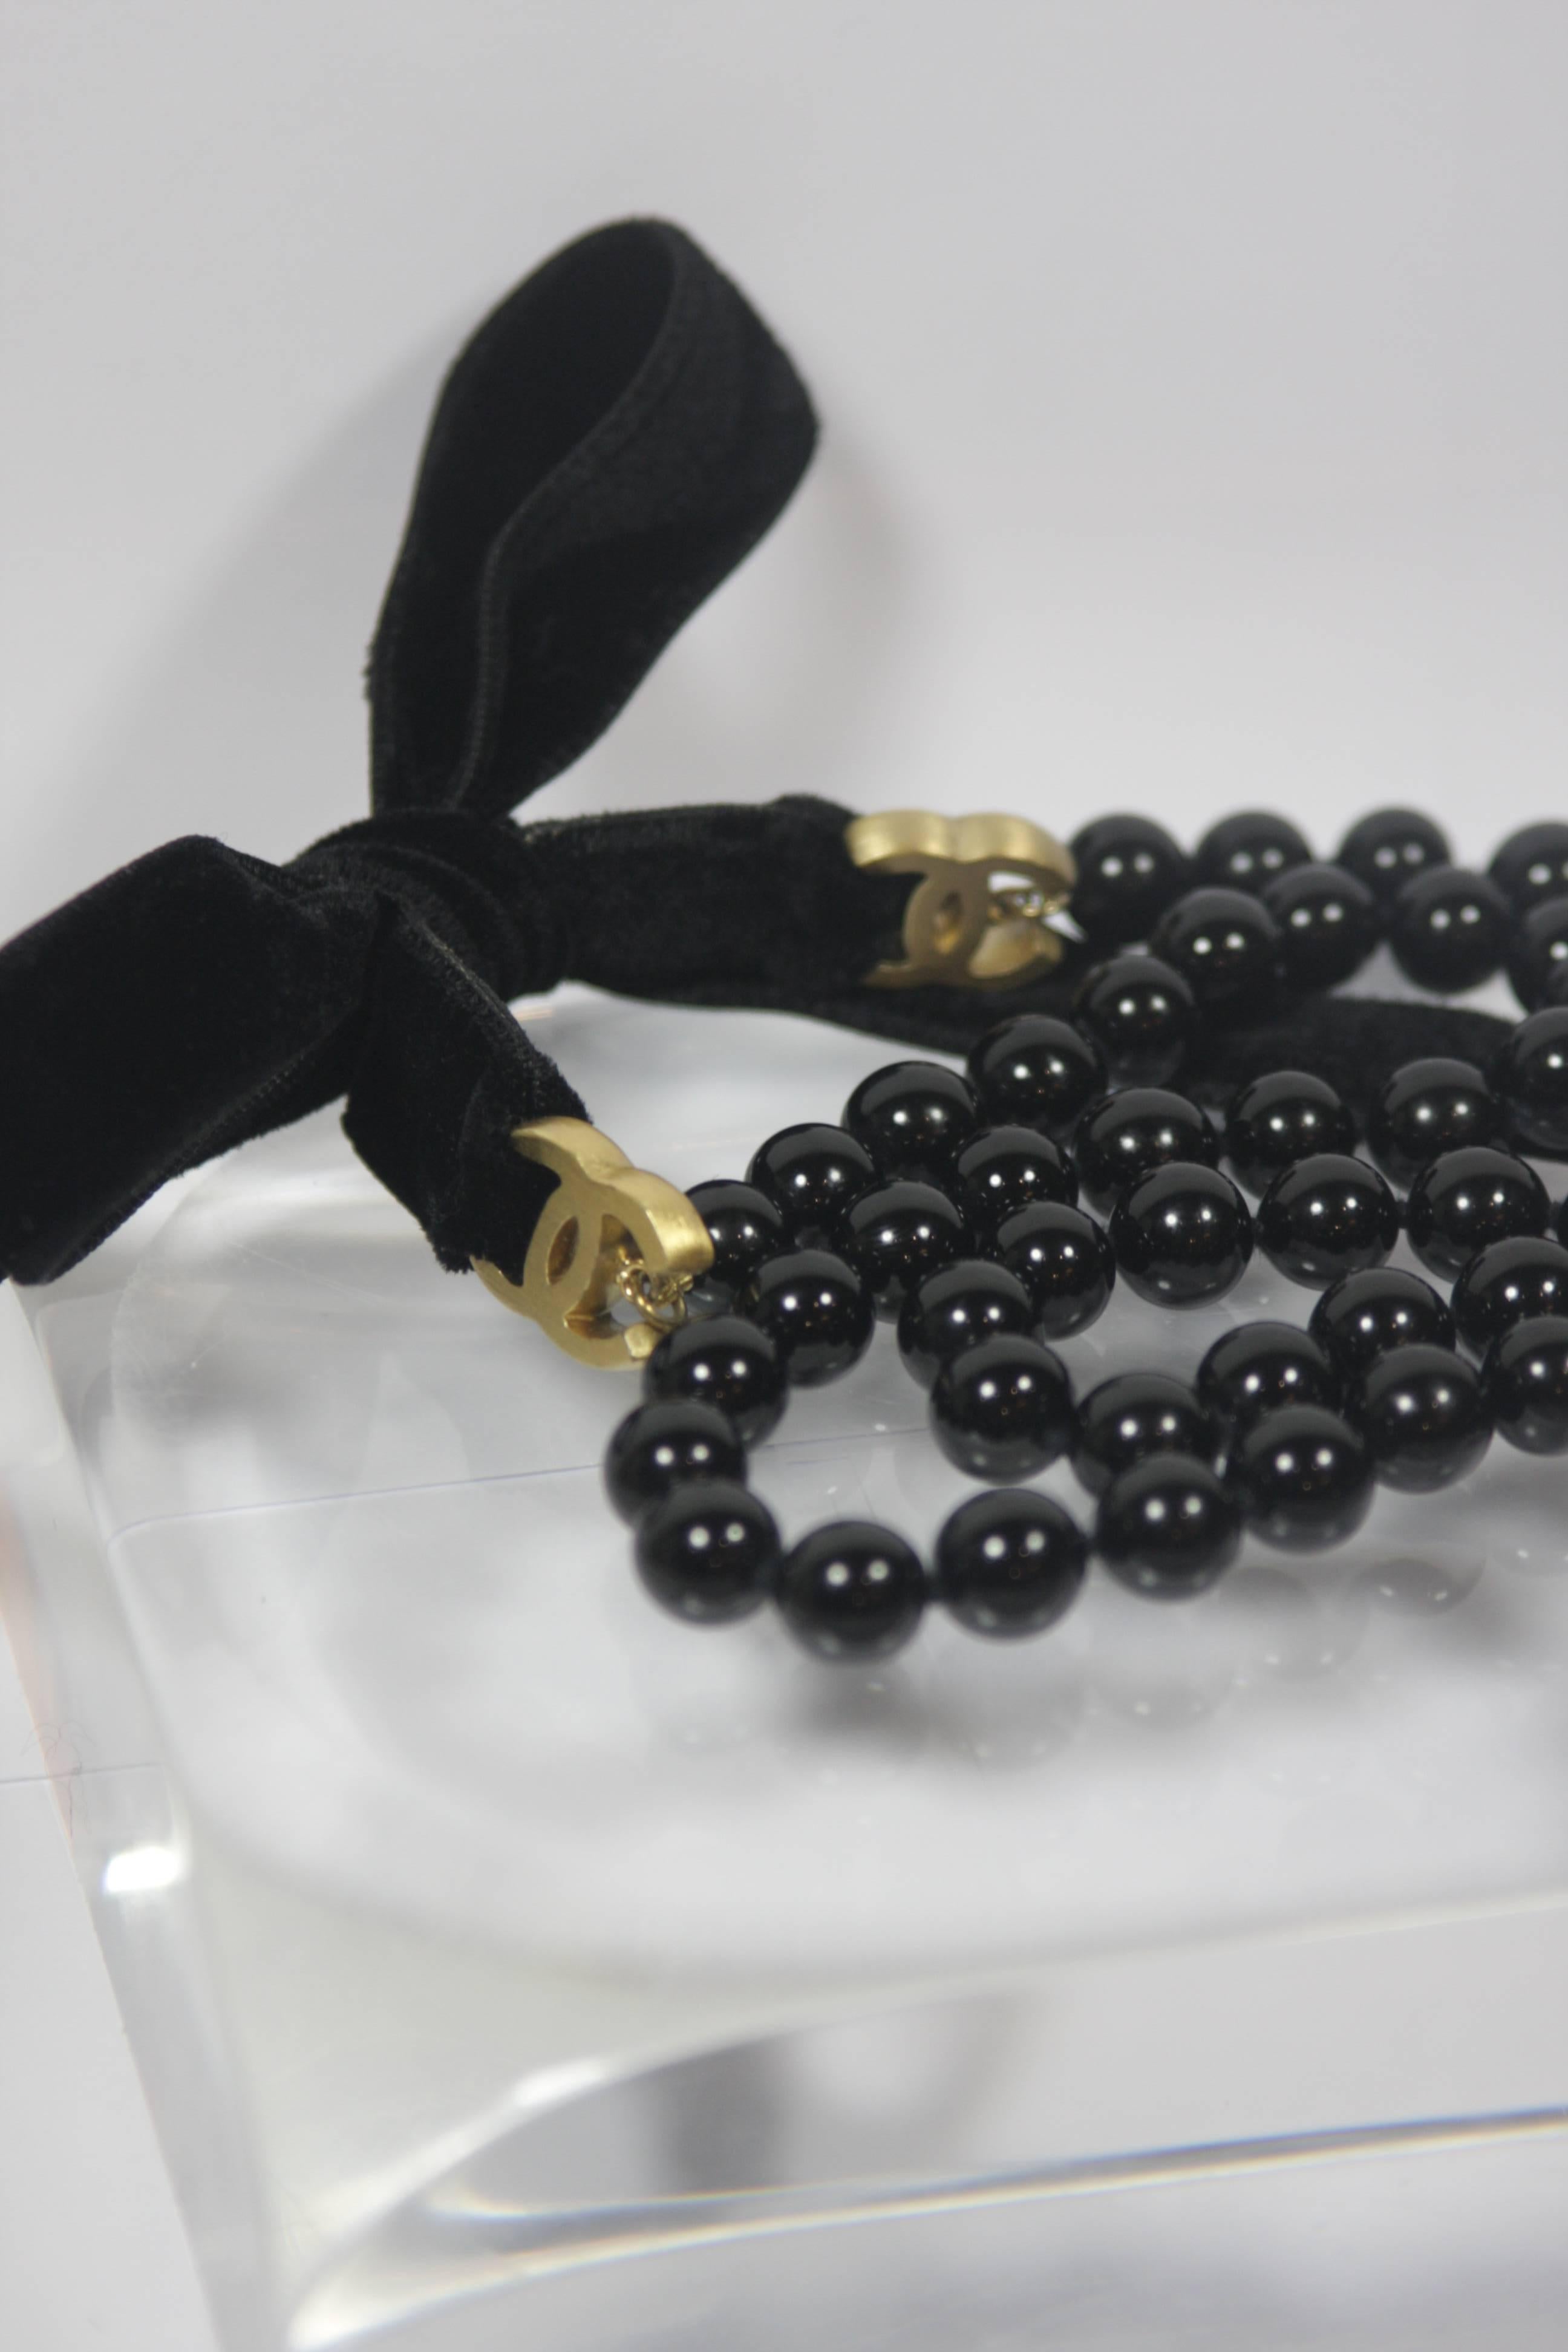 CHANEL Black Bead Necklace or Belt with Velvet Ties and Gold Tone Hardware 1